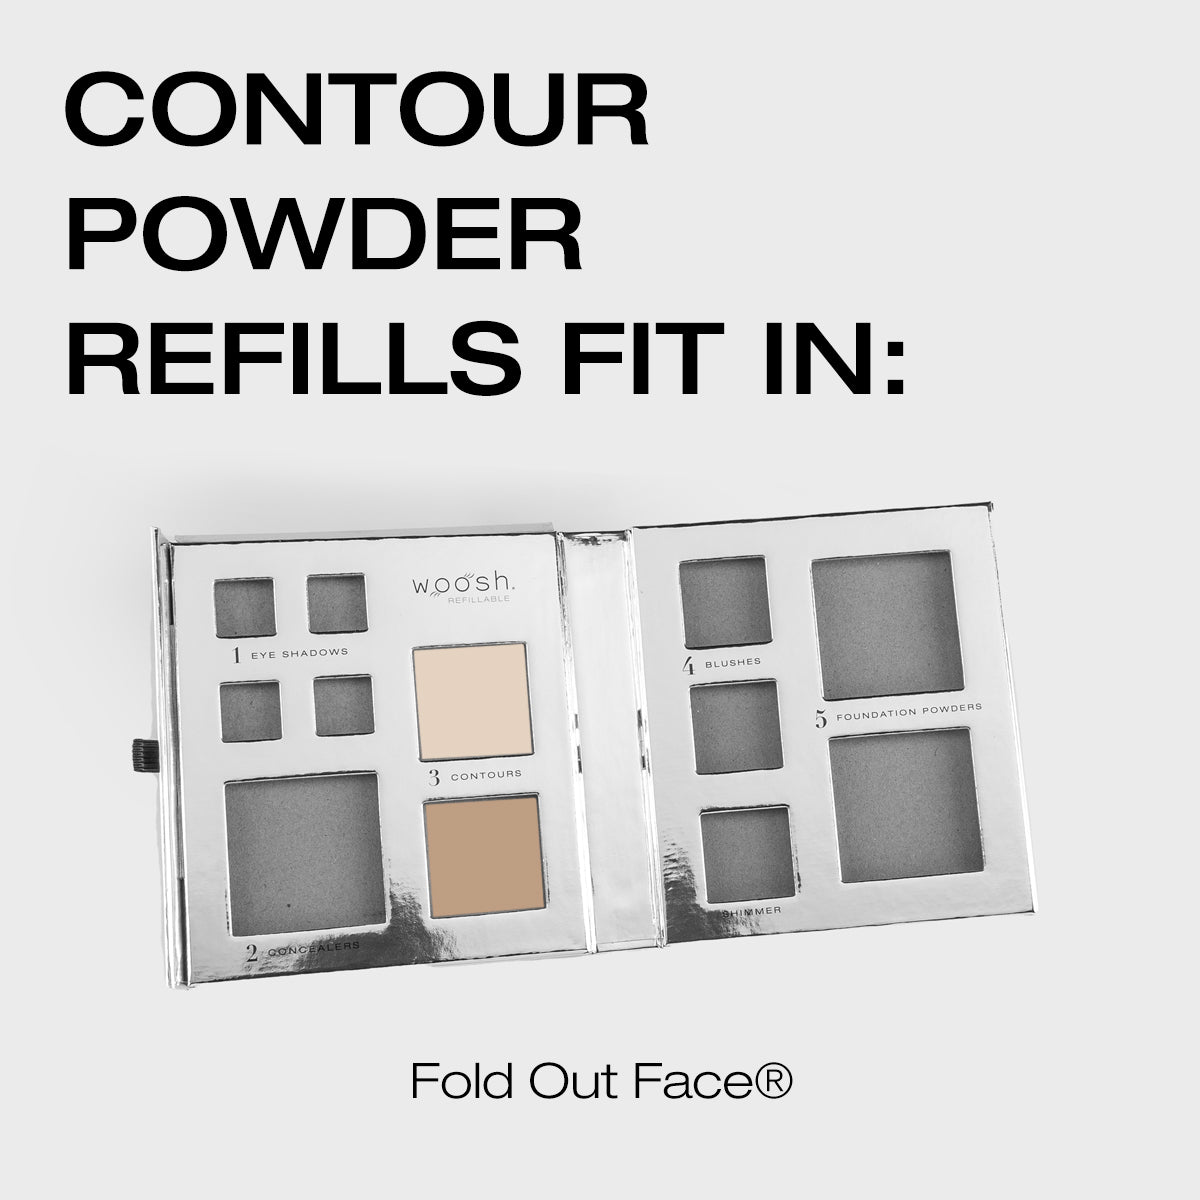 Contour powder refill pans placed into the fold out face.